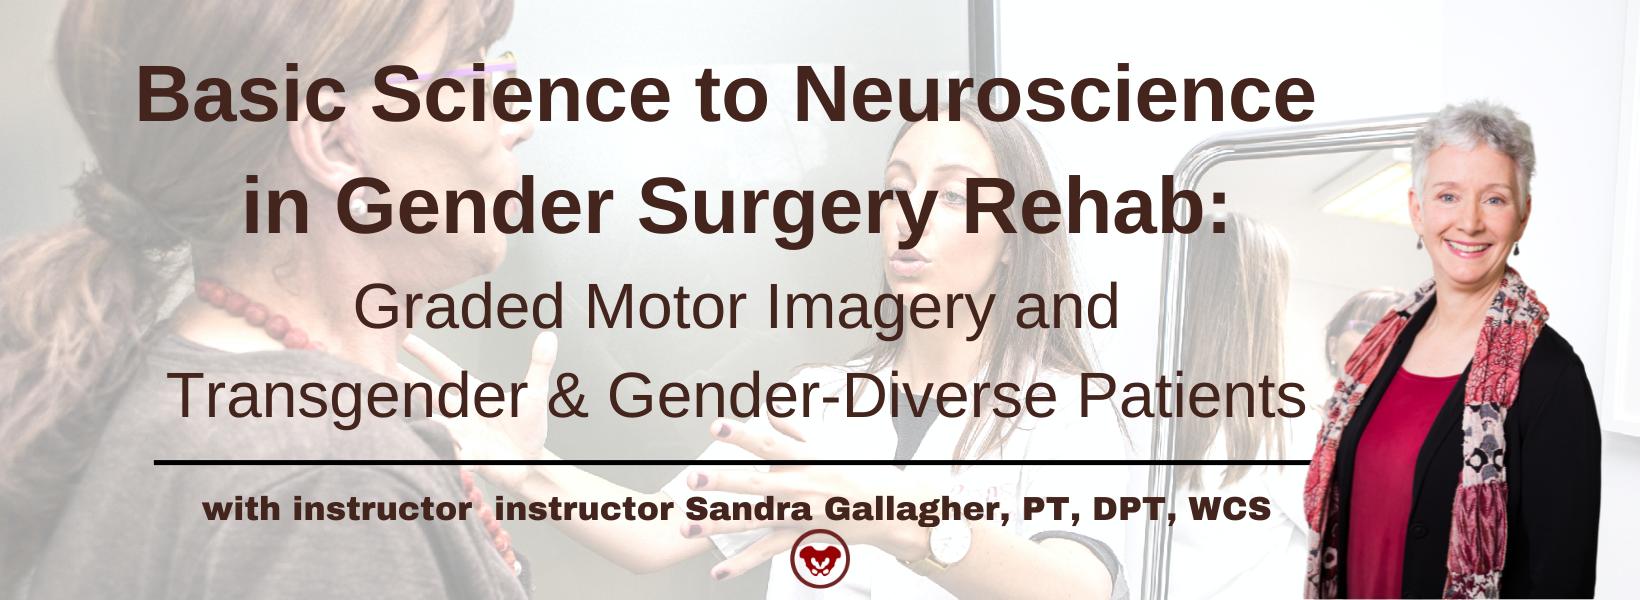 Basic Science to Neuroscience in Gender Surgery Rehab